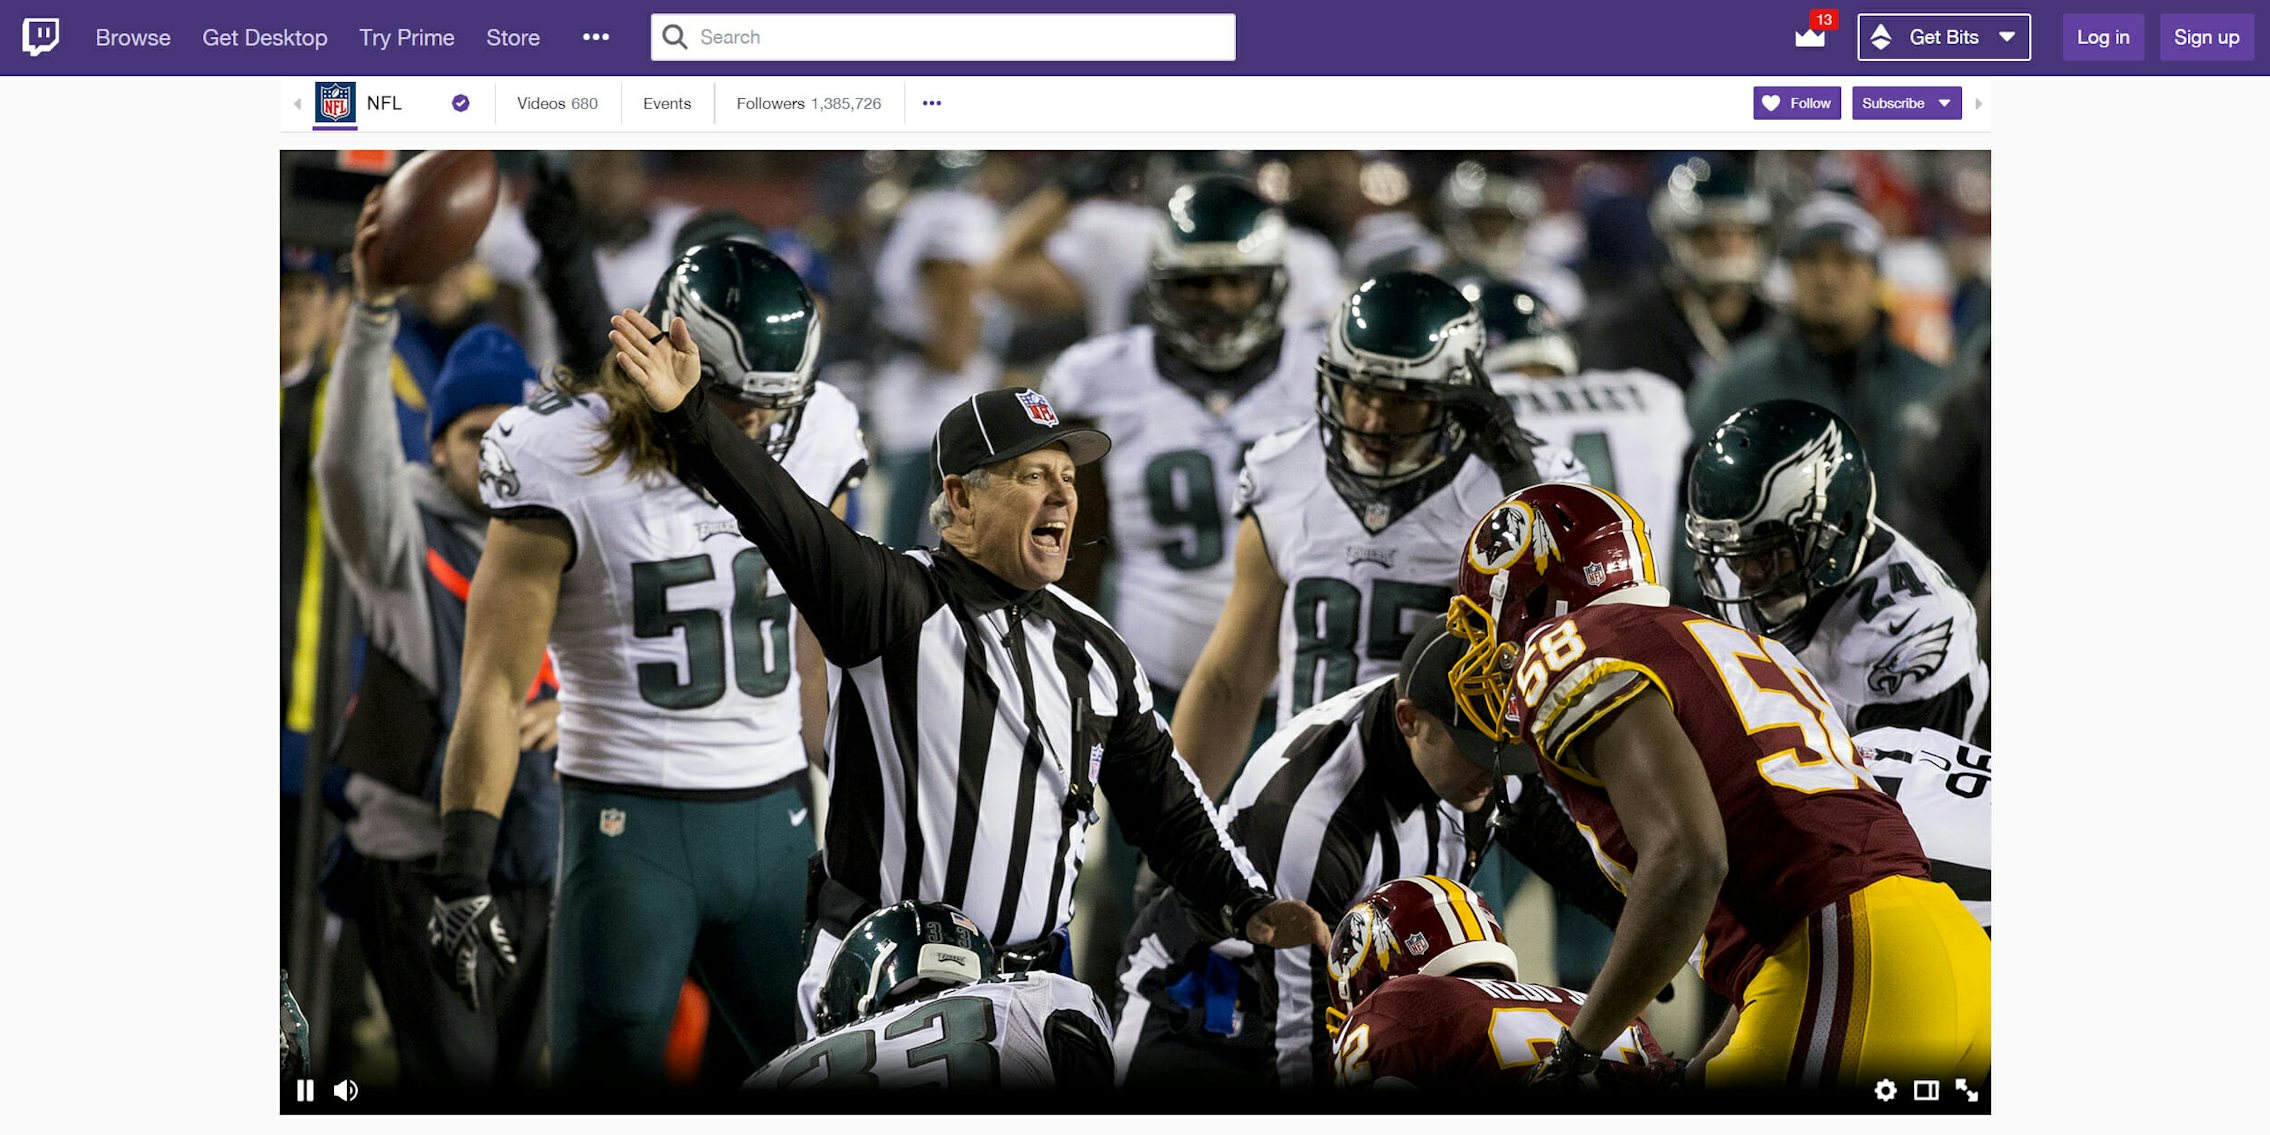 how to watch thursday night football live stream on twitch